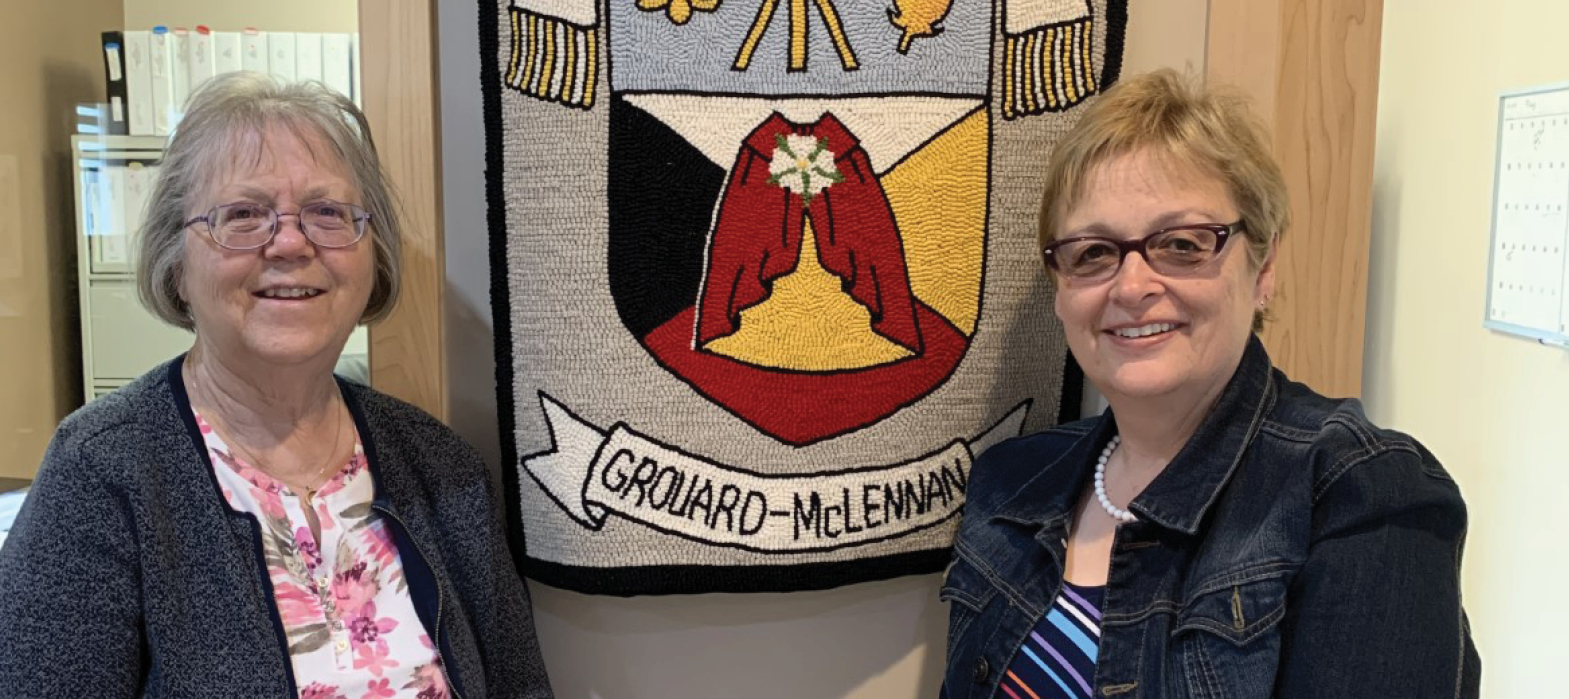 refugee sponsors from Catholic Archdiocese of Grouard-McLennan